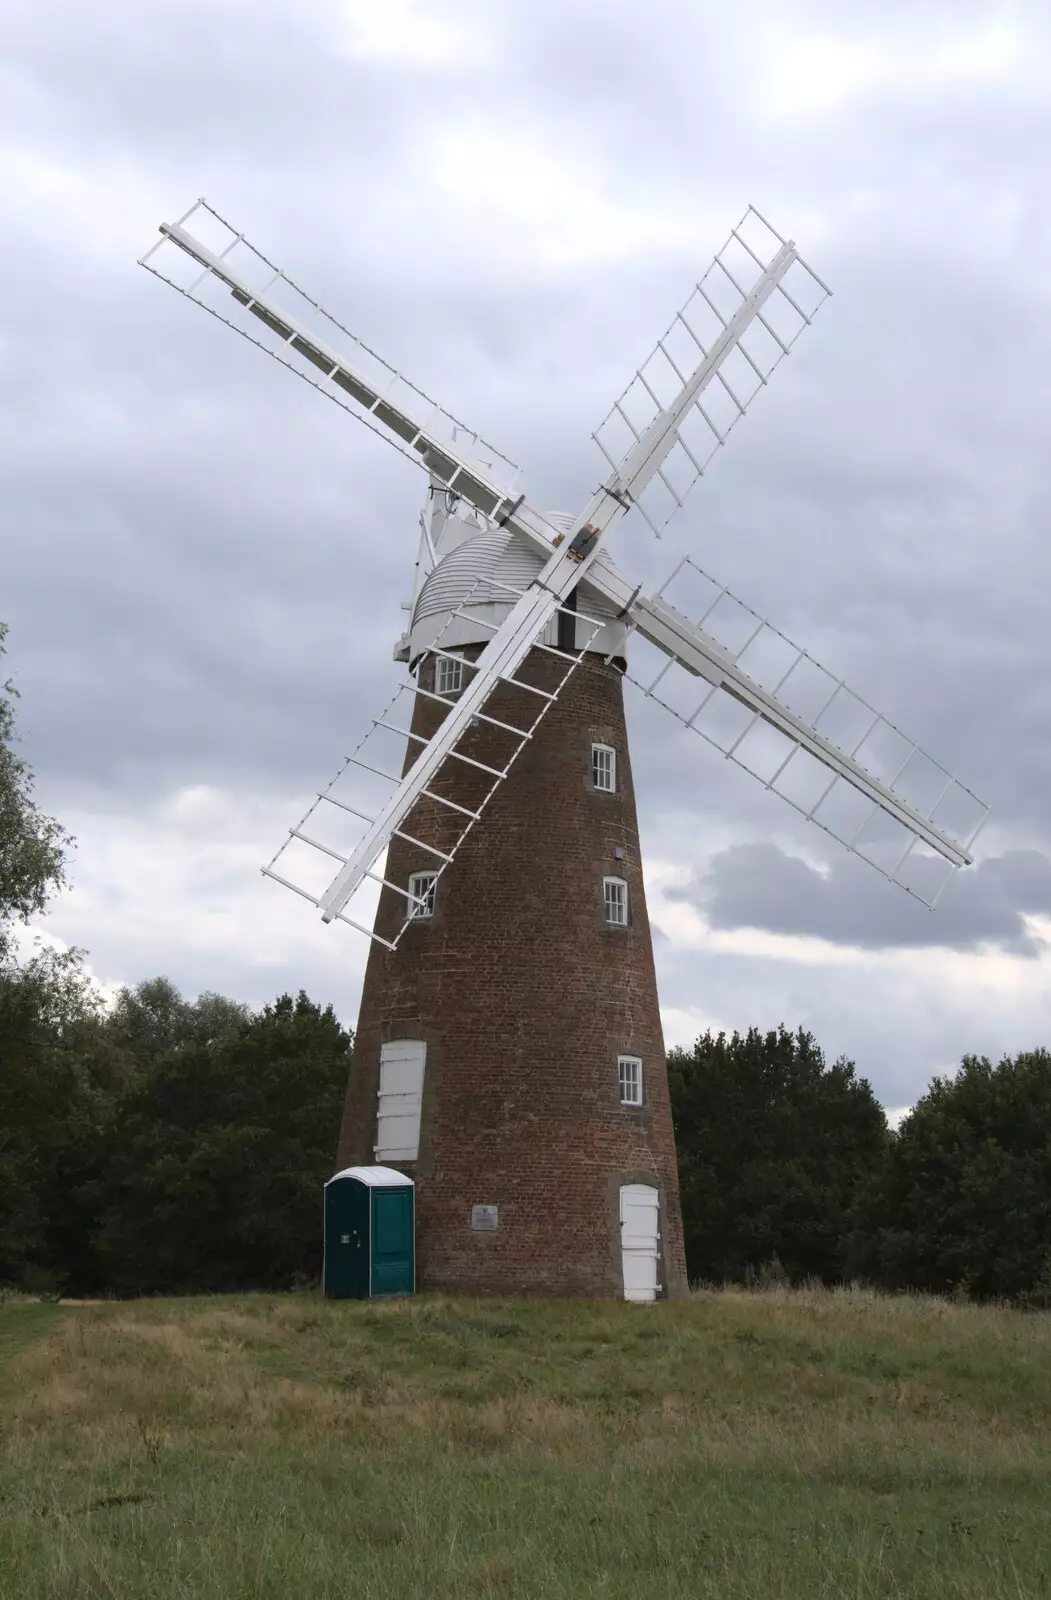 Billingford Windmill is now full re-sailed, from Camping at Three Rivers, Geldeston, Norfolk - 5th September 2020